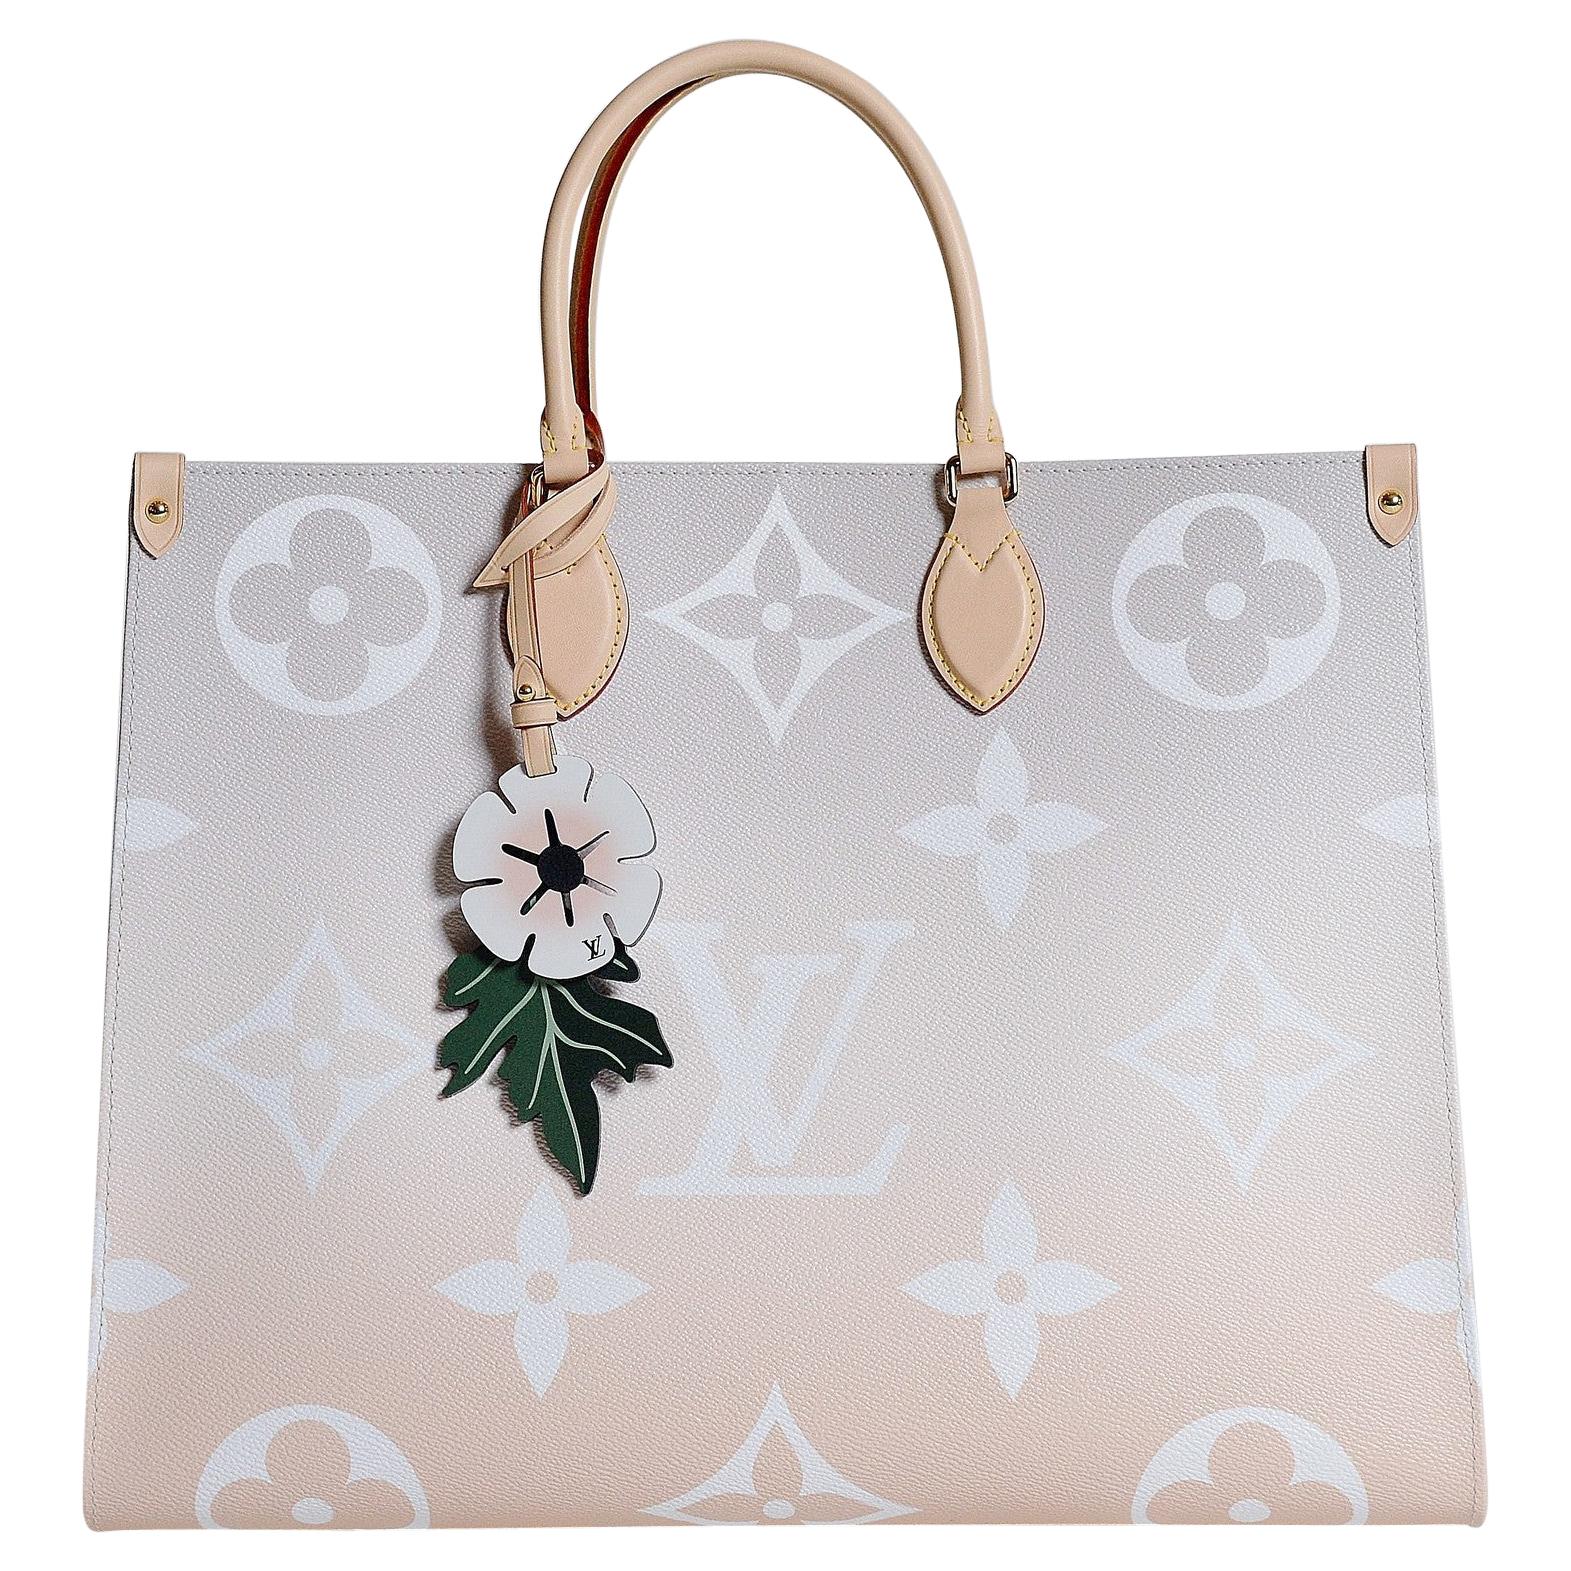 Louis Vuitton splashes in with new LV BY THE POOL collection